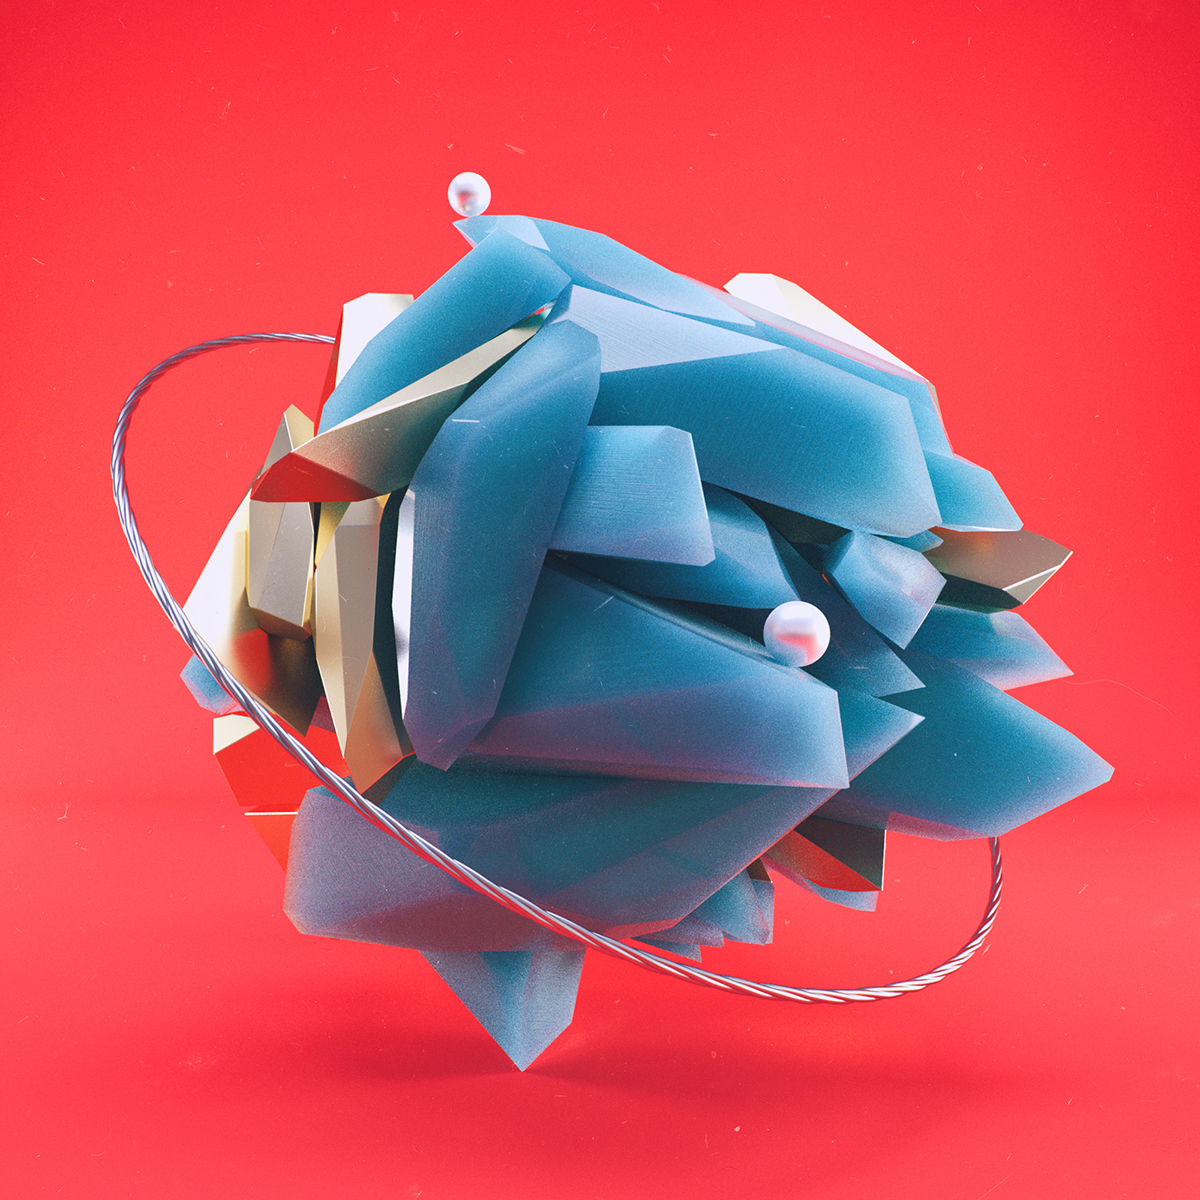 Cinema 4d octane Render 3D Renders daily Landscape abstract surreal geometric graphic design Zbrush xparticles